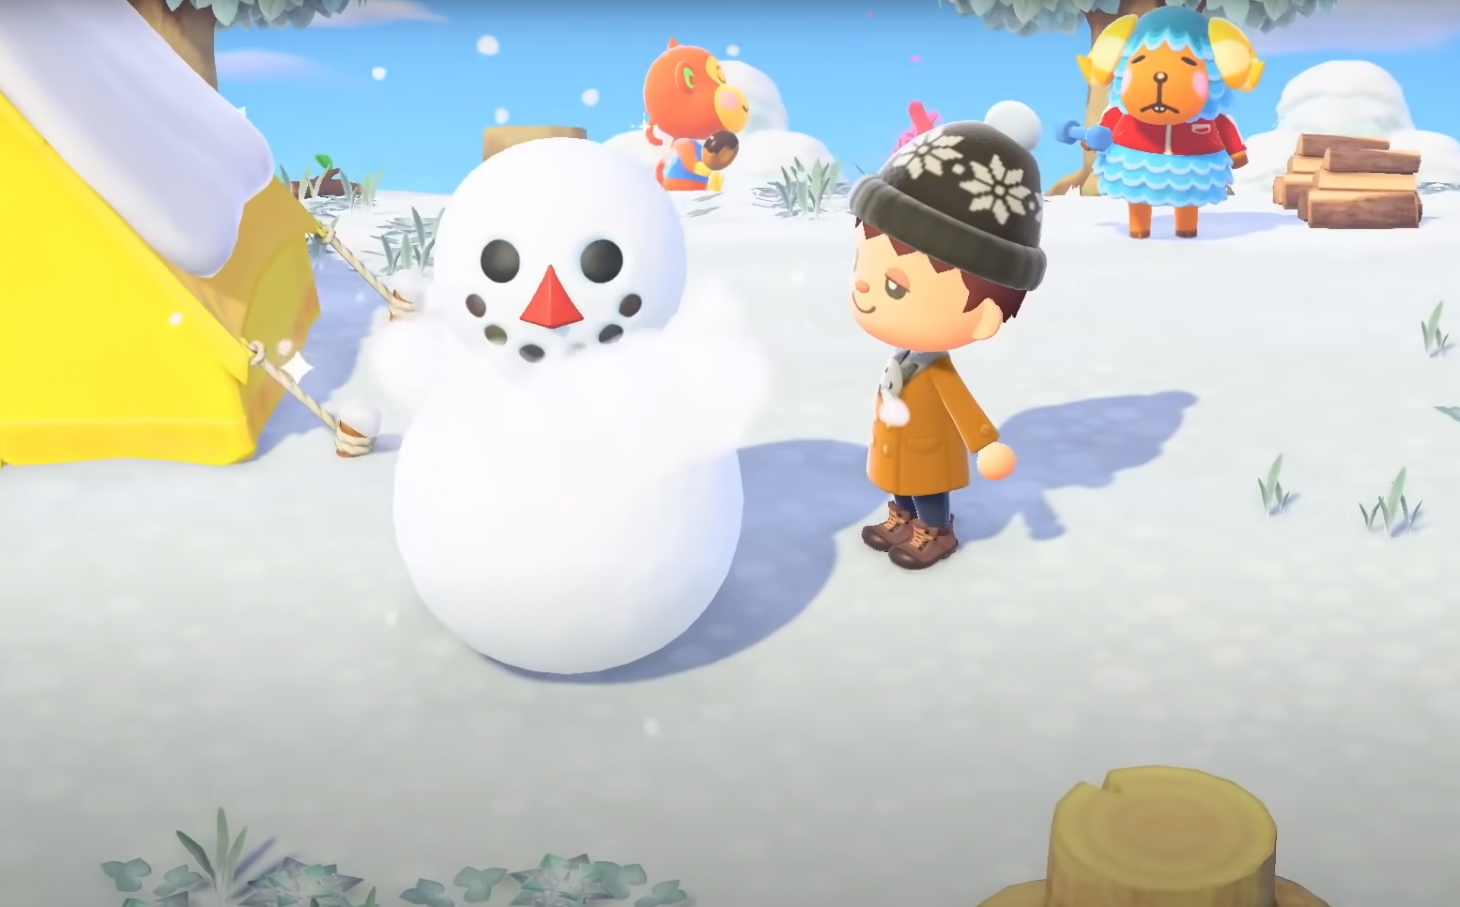 How To Get Large Snowflakes In Animal Crossing: New Horizons